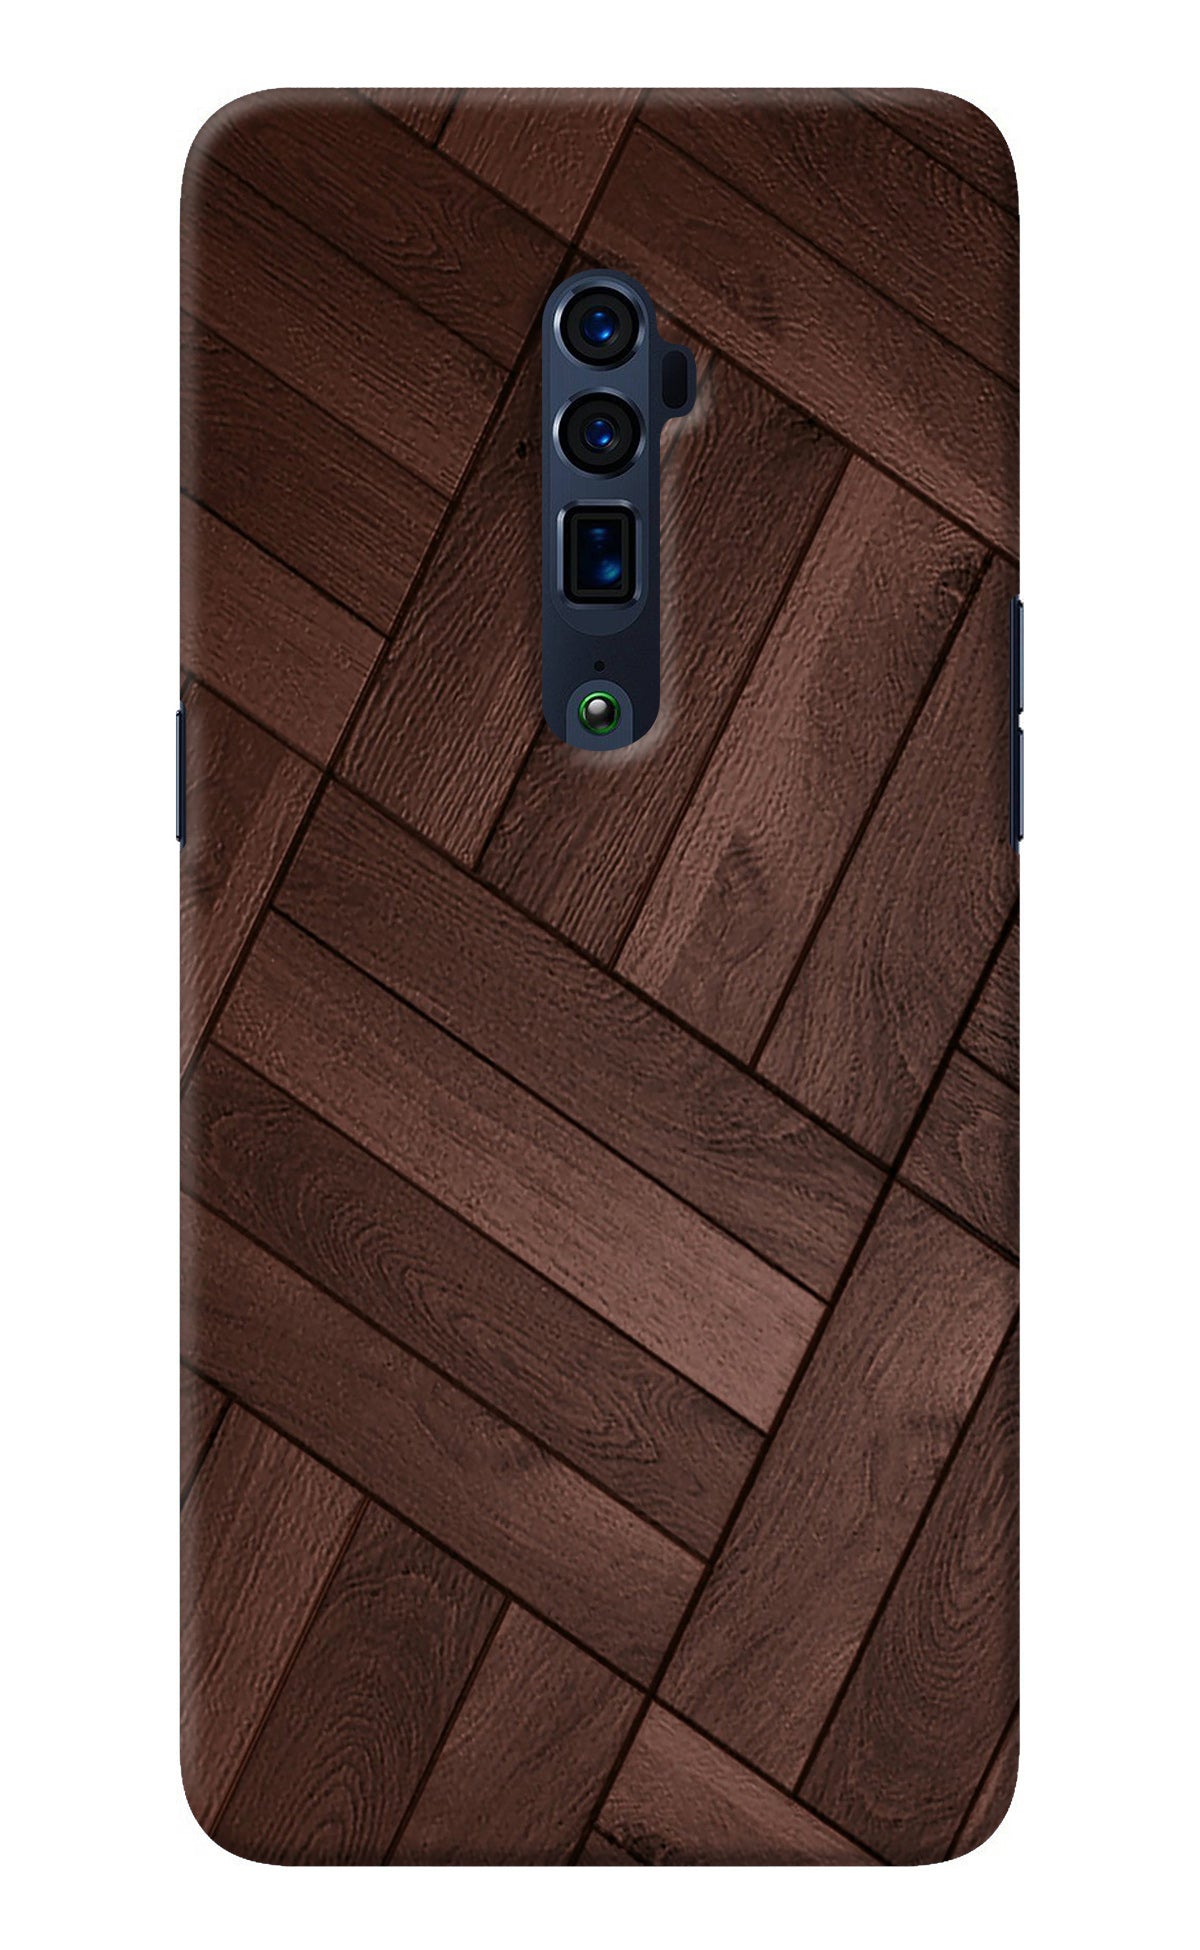 Wooden Texture Design Oppo Reno 10x Zoom Back Cover